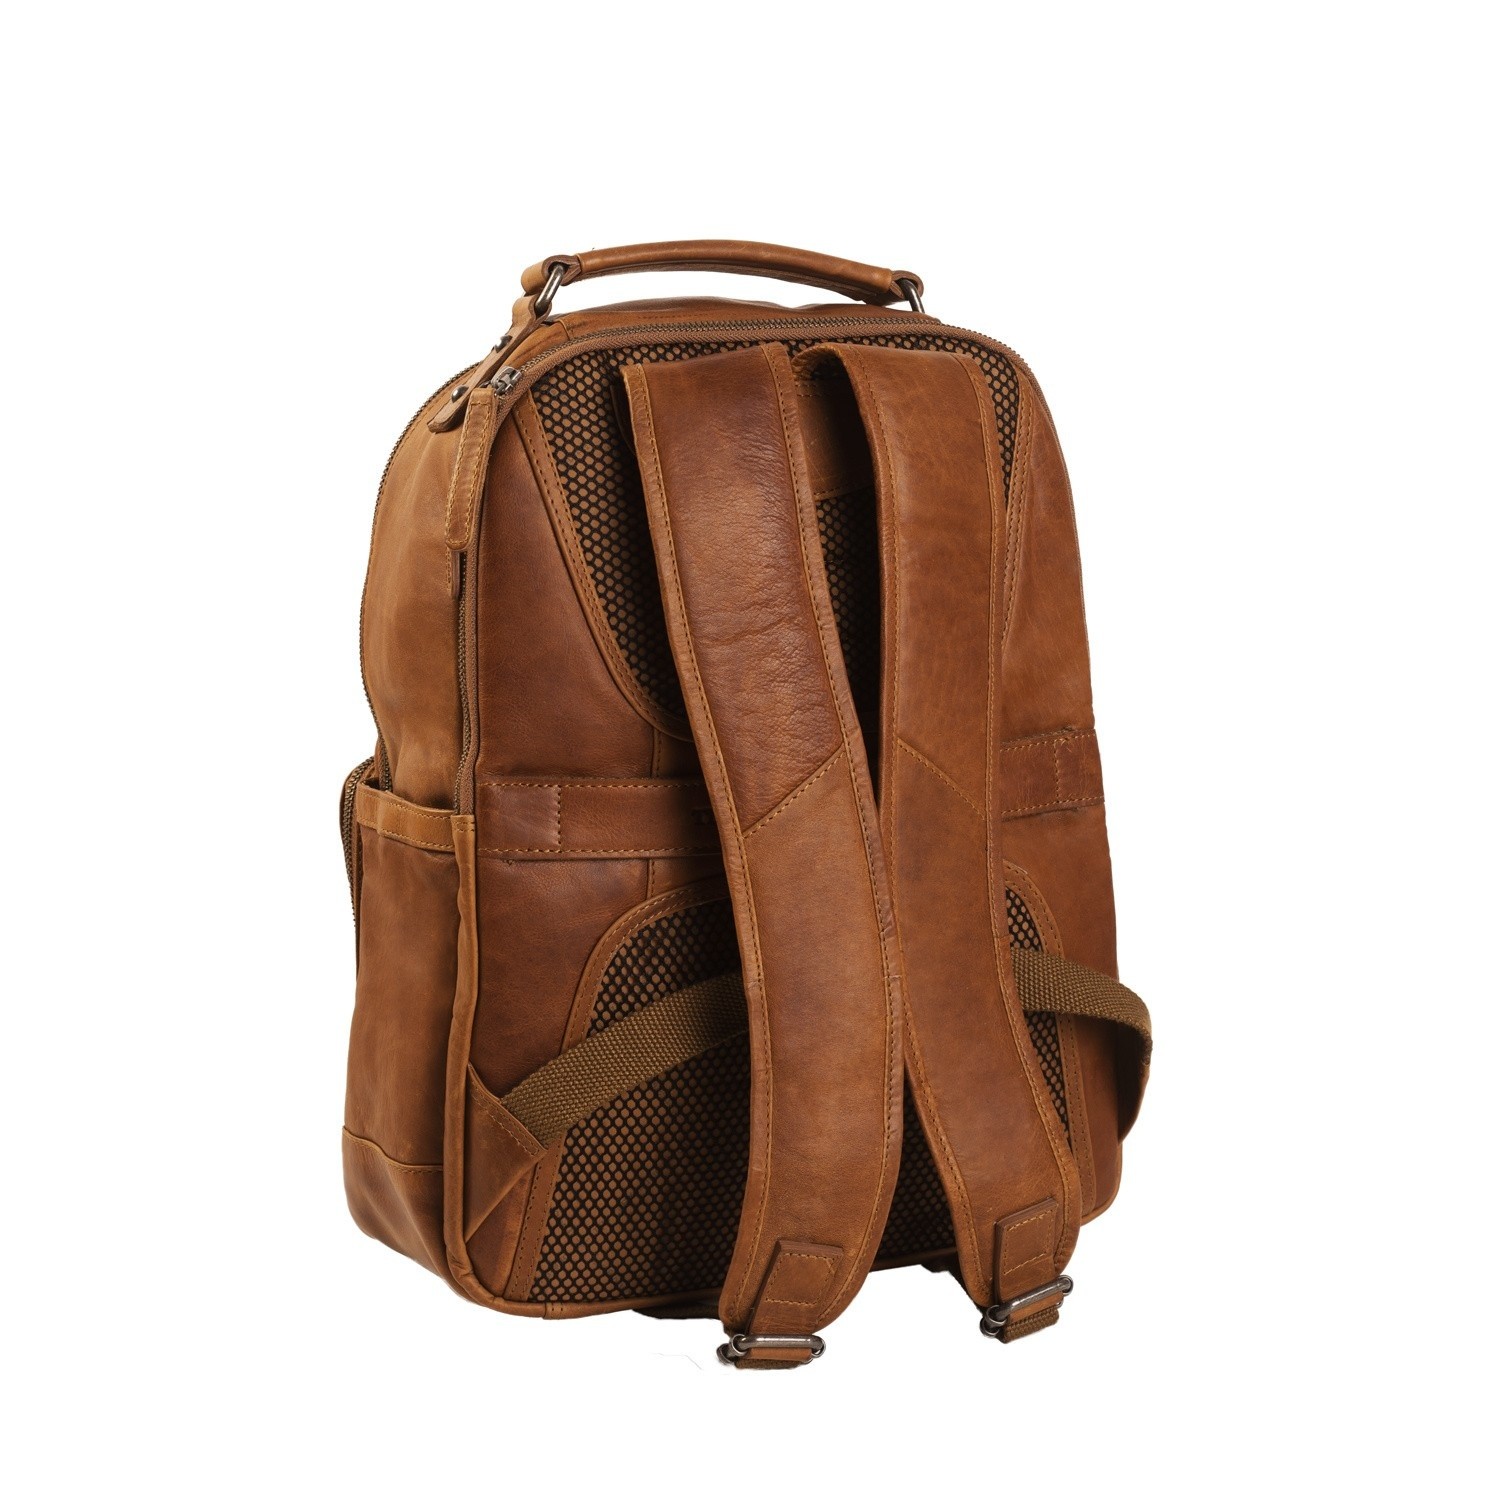 Austin Leather Backpack Cognac Brand Chesterfield - The